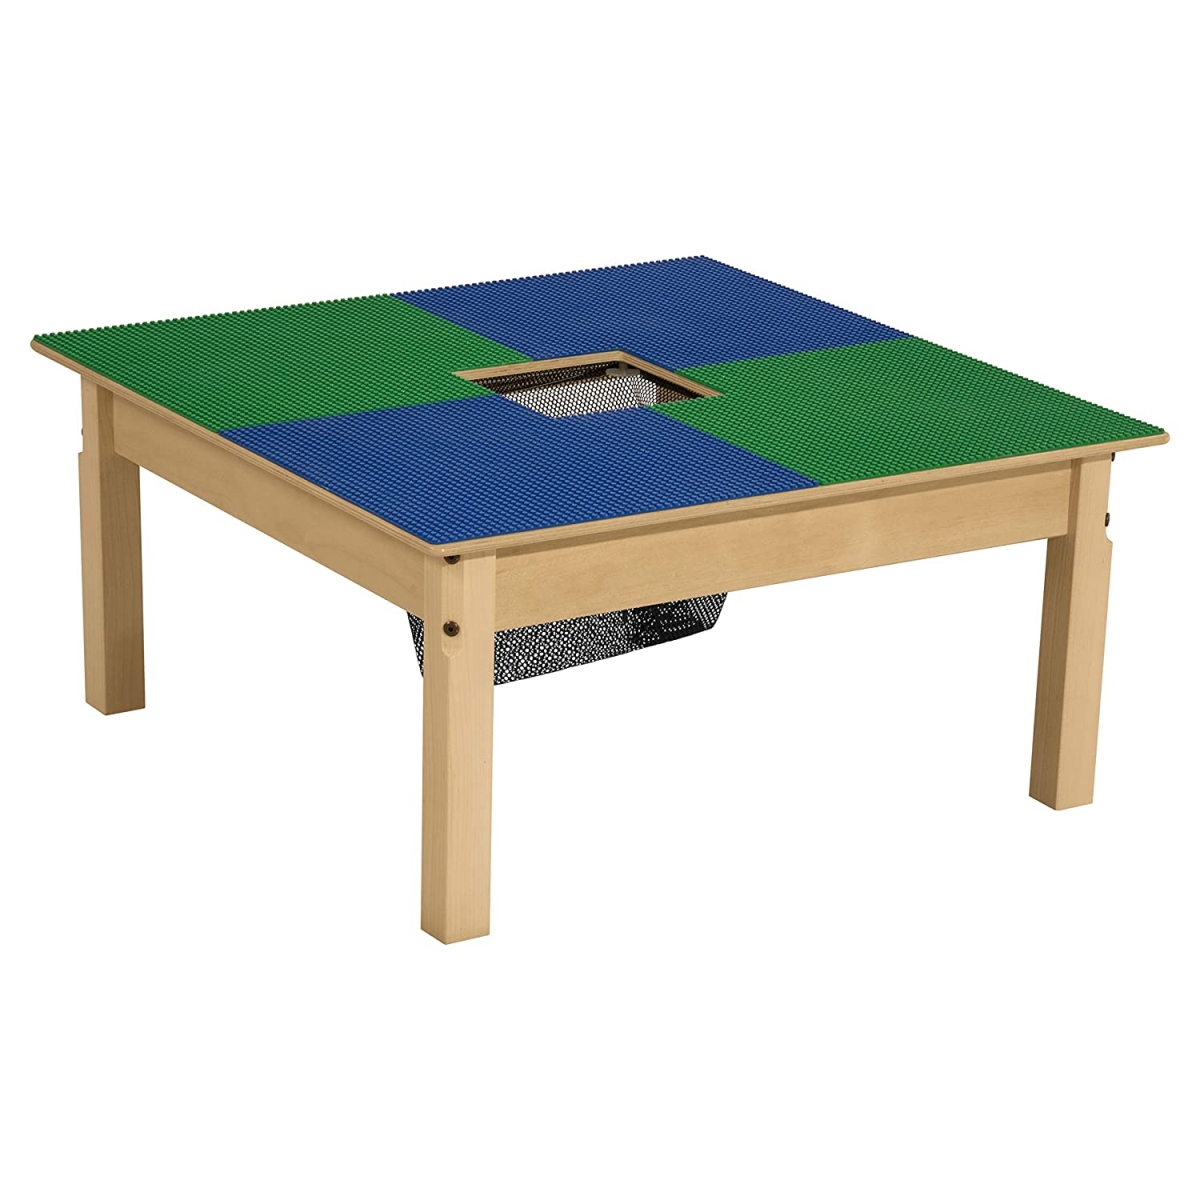 Tp3131sgn20-bg 20 In. Lego Compatible Table With Legs, Blue & Green - Square